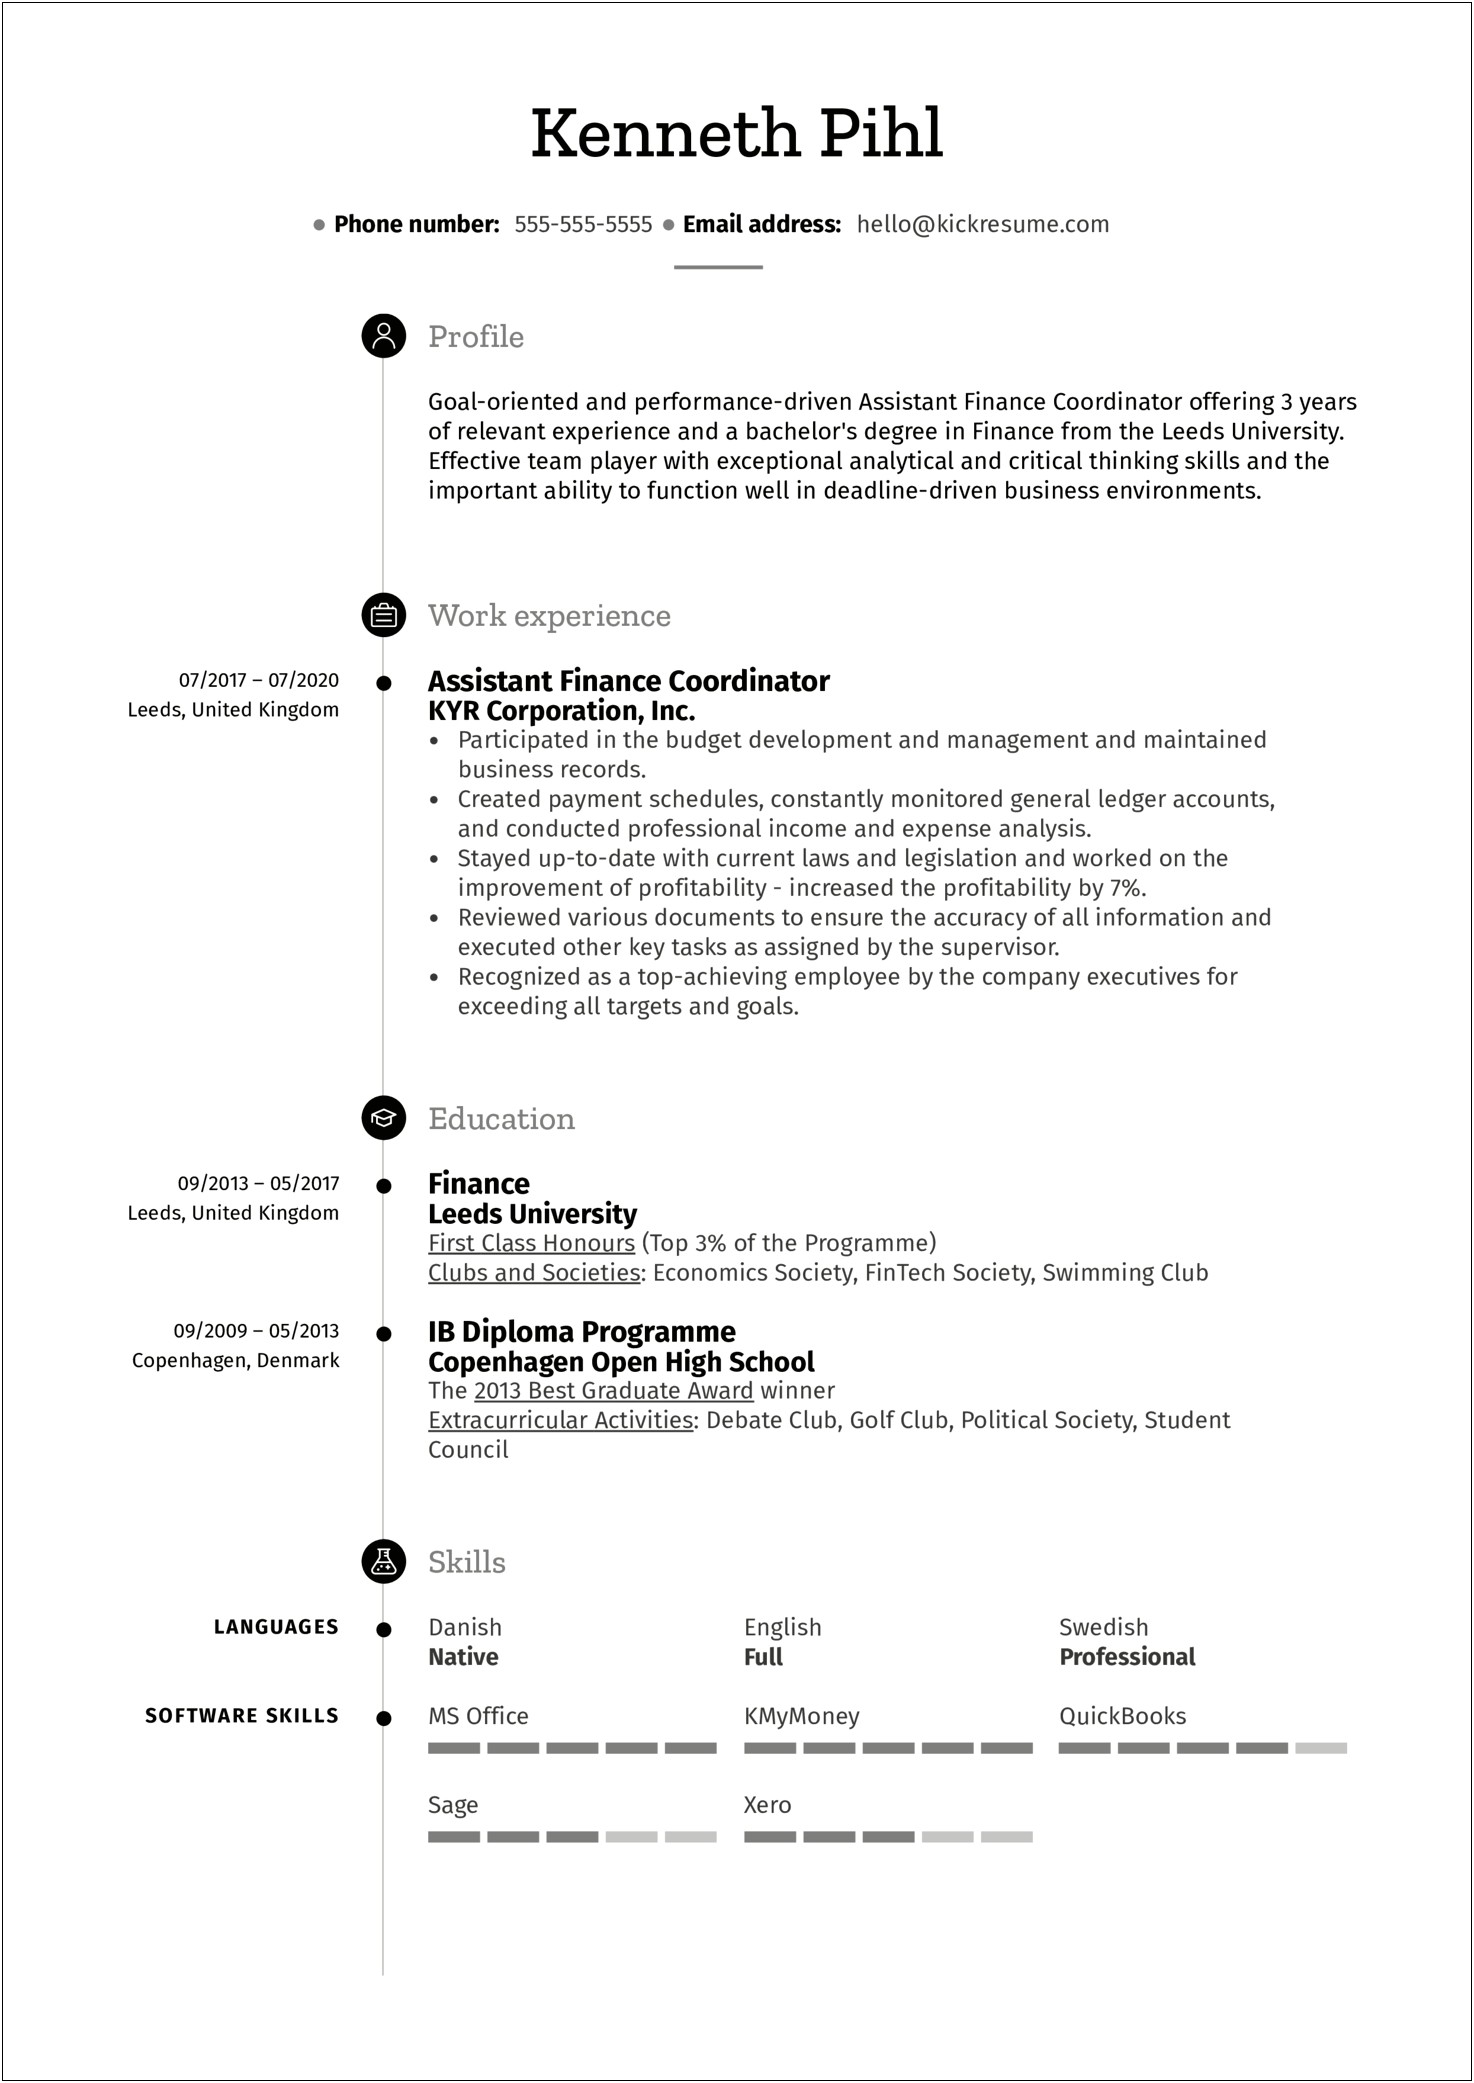 Resume Work Experience Or Education First